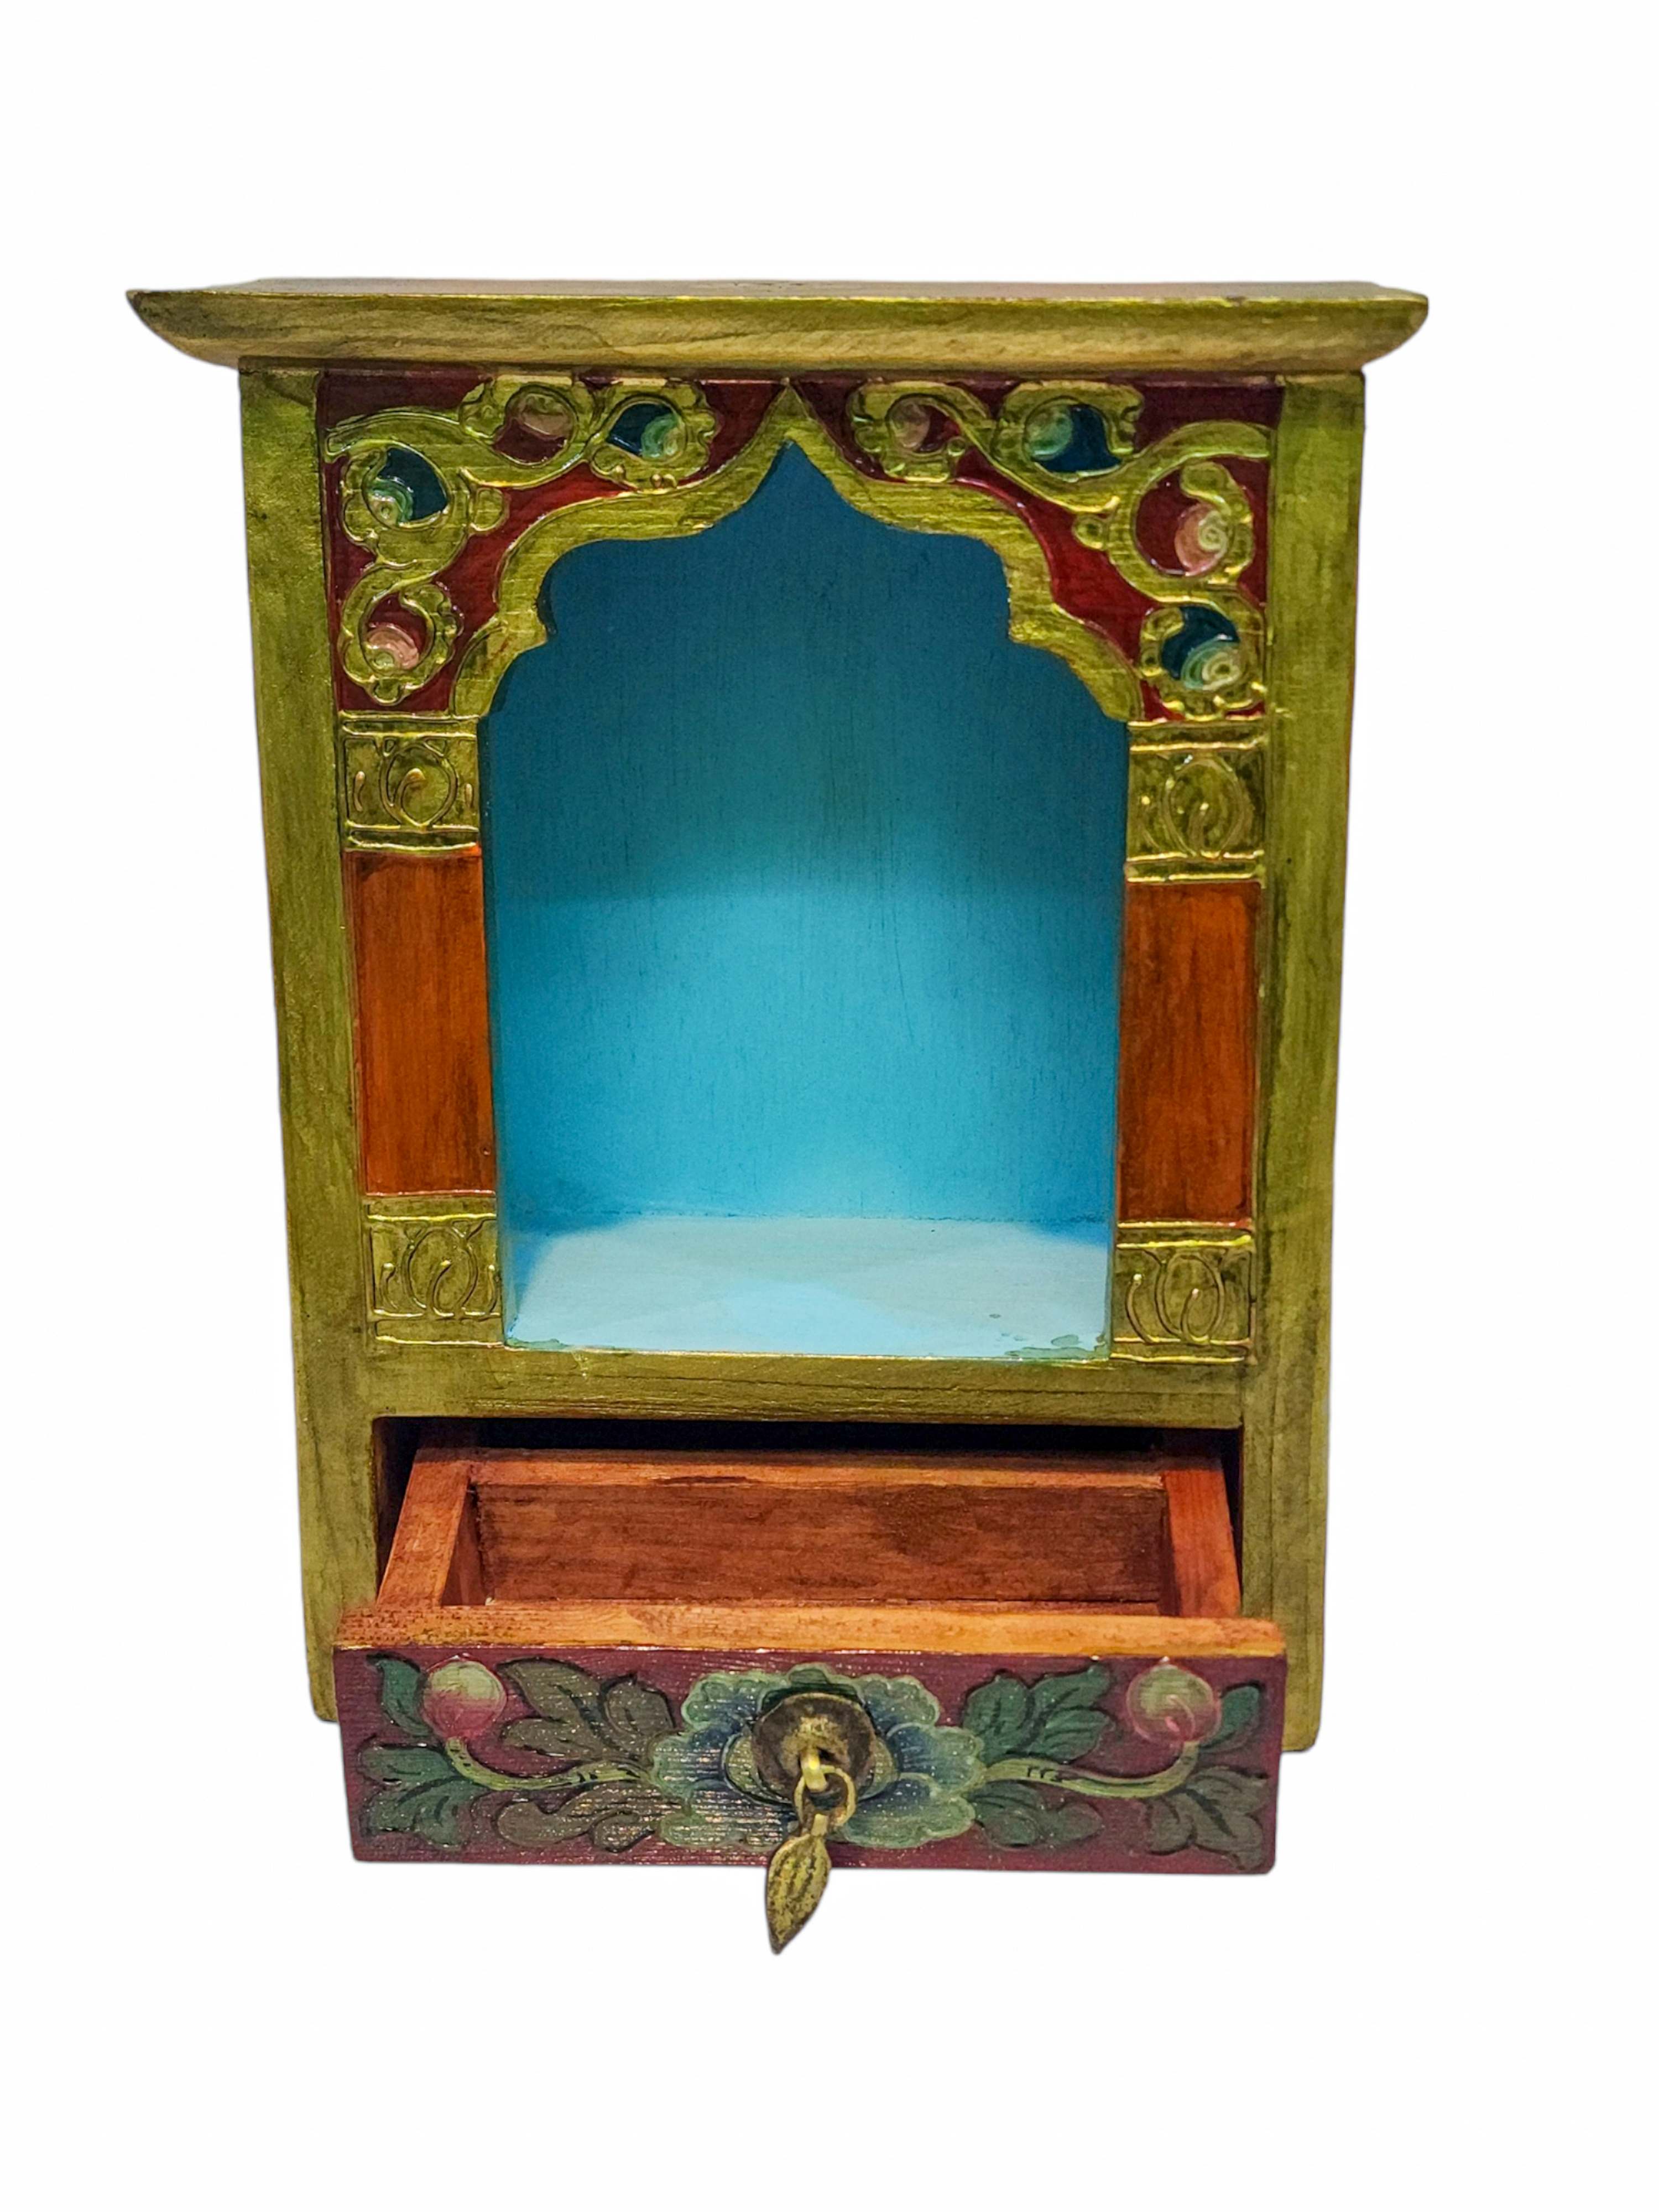 Tibetan Ritual Wooden Altar, Traditional Color Painted